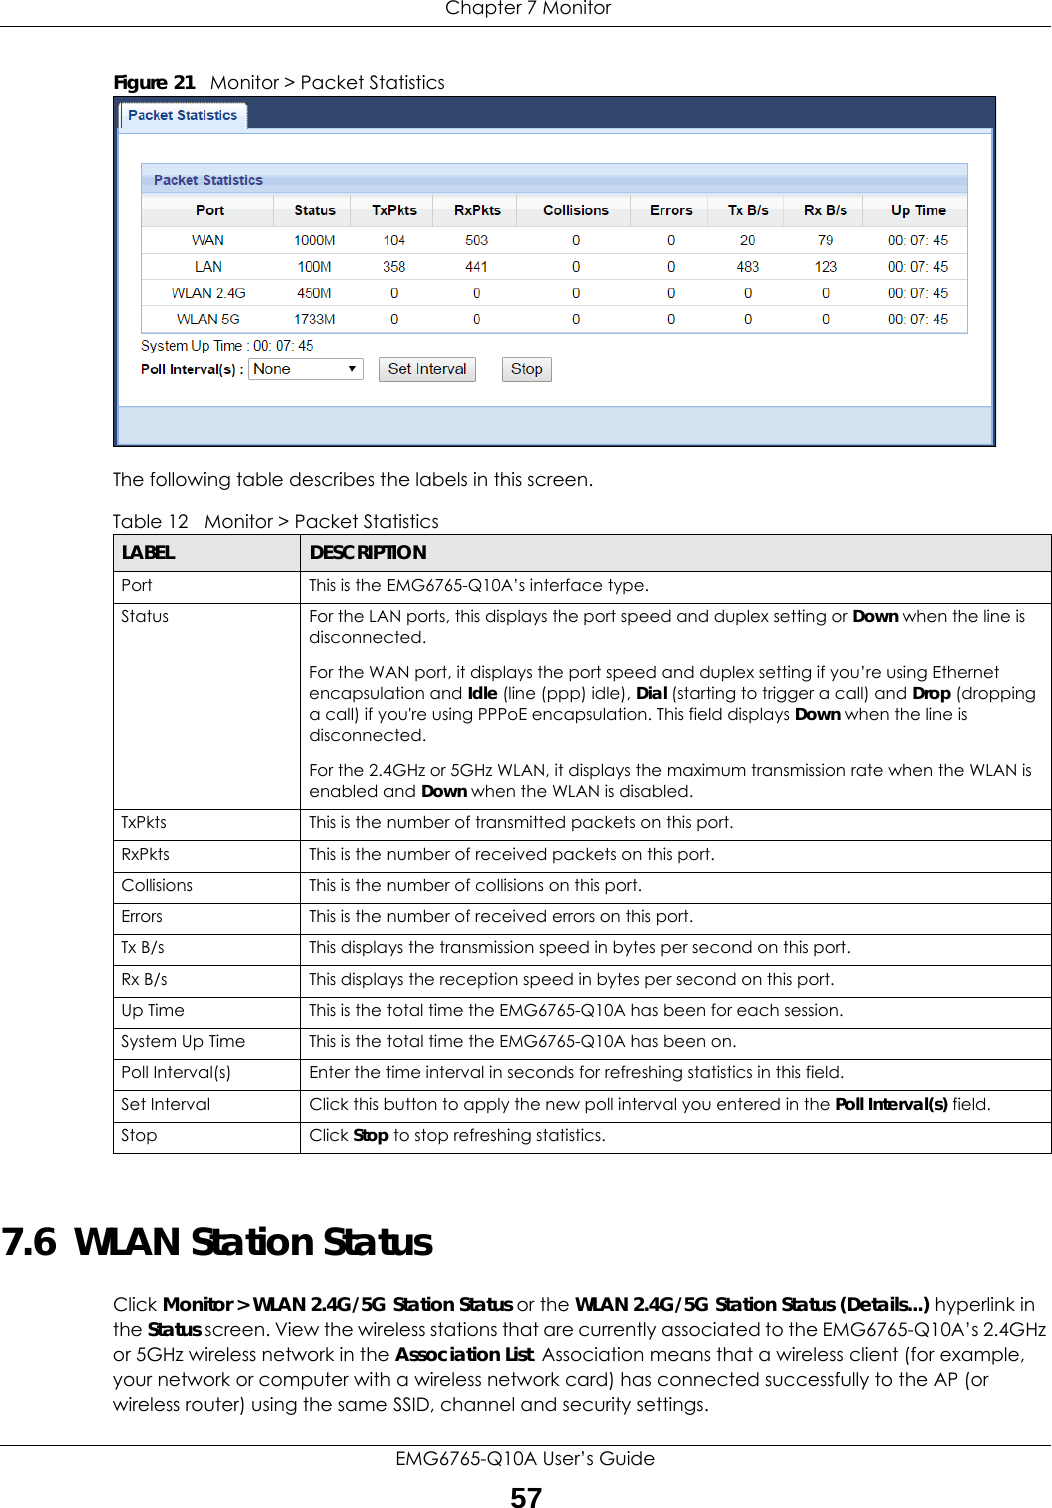  Chapter 7 MonitorEMG6765-Q10A User’s Guide57Figure 21   Monitor &gt; Packet Statistics The following table describes the labels in this screen.7.6  WLAN Station Status     Click Monitor &gt; WLAN 2.4G/5G Station Status or the WLAN 2.4G/5G Station Status (Details...) hyperlink in the Status screen. View the wireless stations that are currently associated to the EMG6765-Q10A’s 2.4GHz or 5GHz wireless network in the Association List. Association means that a wireless client (for example, your network or computer with a wireless network card) has connected successfully to the AP (or wireless router) using the same SSID, channel and security settings.Table 12   Monitor &gt; Packet StatisticsLABEL DESCRIPTIONPort This is the EMG6765-Q10A’s interface type.Status  For the LAN ports, this displays the port speed and duplex setting or Down when the line is disconnected.For the WAN port, it displays the port speed and duplex setting if you’re using Ethernet encapsulation and Idle (line (ppp) idle), Dial (starting to trigger a call) and Drop (dropping a call) if you&apos;re using PPPoE encapsulation. This field displays Down when the line is disconnected.For the 2.4GHz or 5GHz WLAN, it displays the maximum transmission rate when the WLAN is enabled and Down when the WLAN is disabled.TxPkts  This is the number of transmitted packets on this port.RxPkts  This is the number of received packets on this port.Collisions  This is the number of collisions on this port.Errors This is the number of received errors on this port.Tx B/s  This displays the transmission speed in bytes per second on this port.Rx B/s This displays the reception speed in bytes per second on this port.Up Time This is the total time the EMG6765-Q10A has been for each session.System Up Time This is the total time the EMG6765-Q10A has been on.Poll Interval(s) Enter the time interval in seconds for refreshing statistics in this field.Set Interval Click this button to apply the new poll interval you entered in the Poll Interval(s) field.Stop Click Stop to stop refreshing statistics.